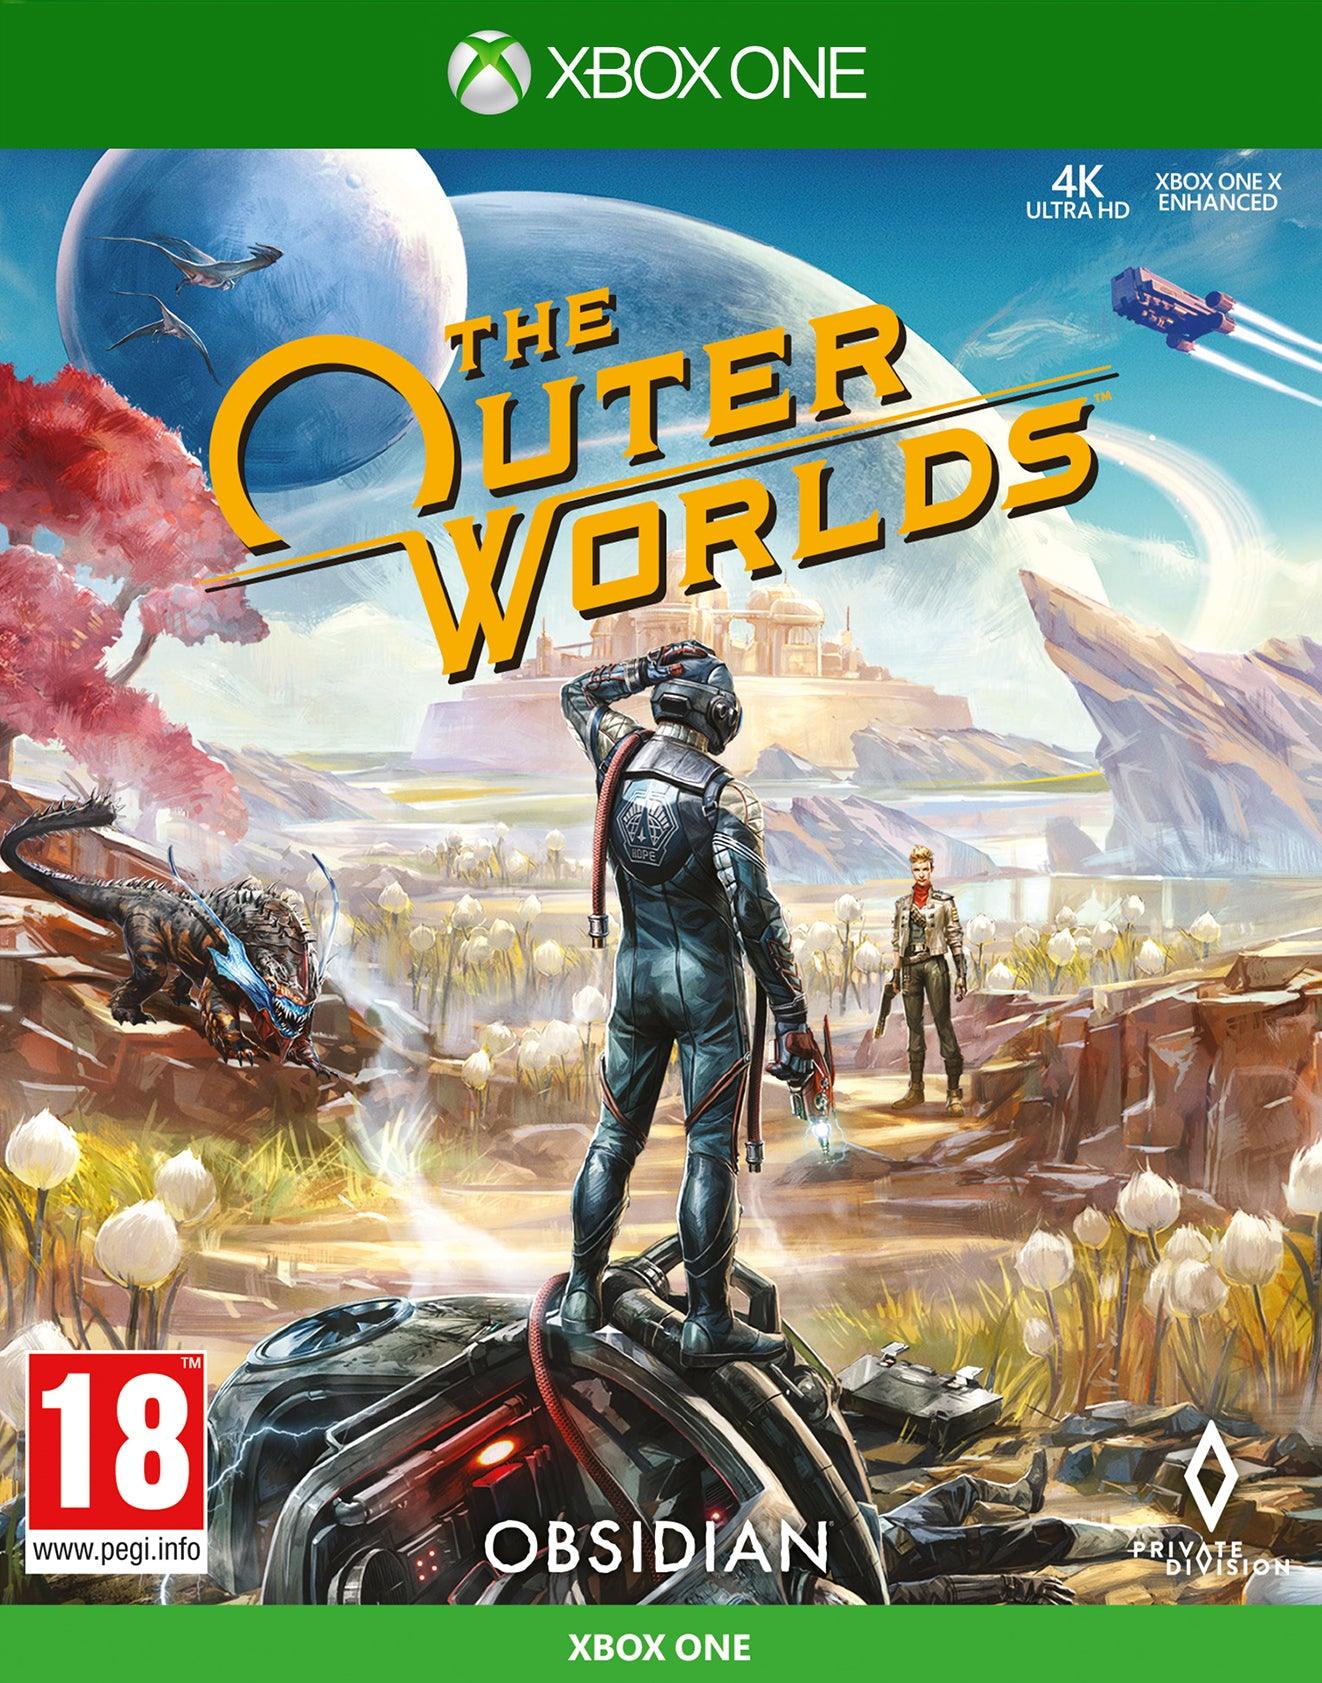 The Outer Worlds - Want a New Gadget